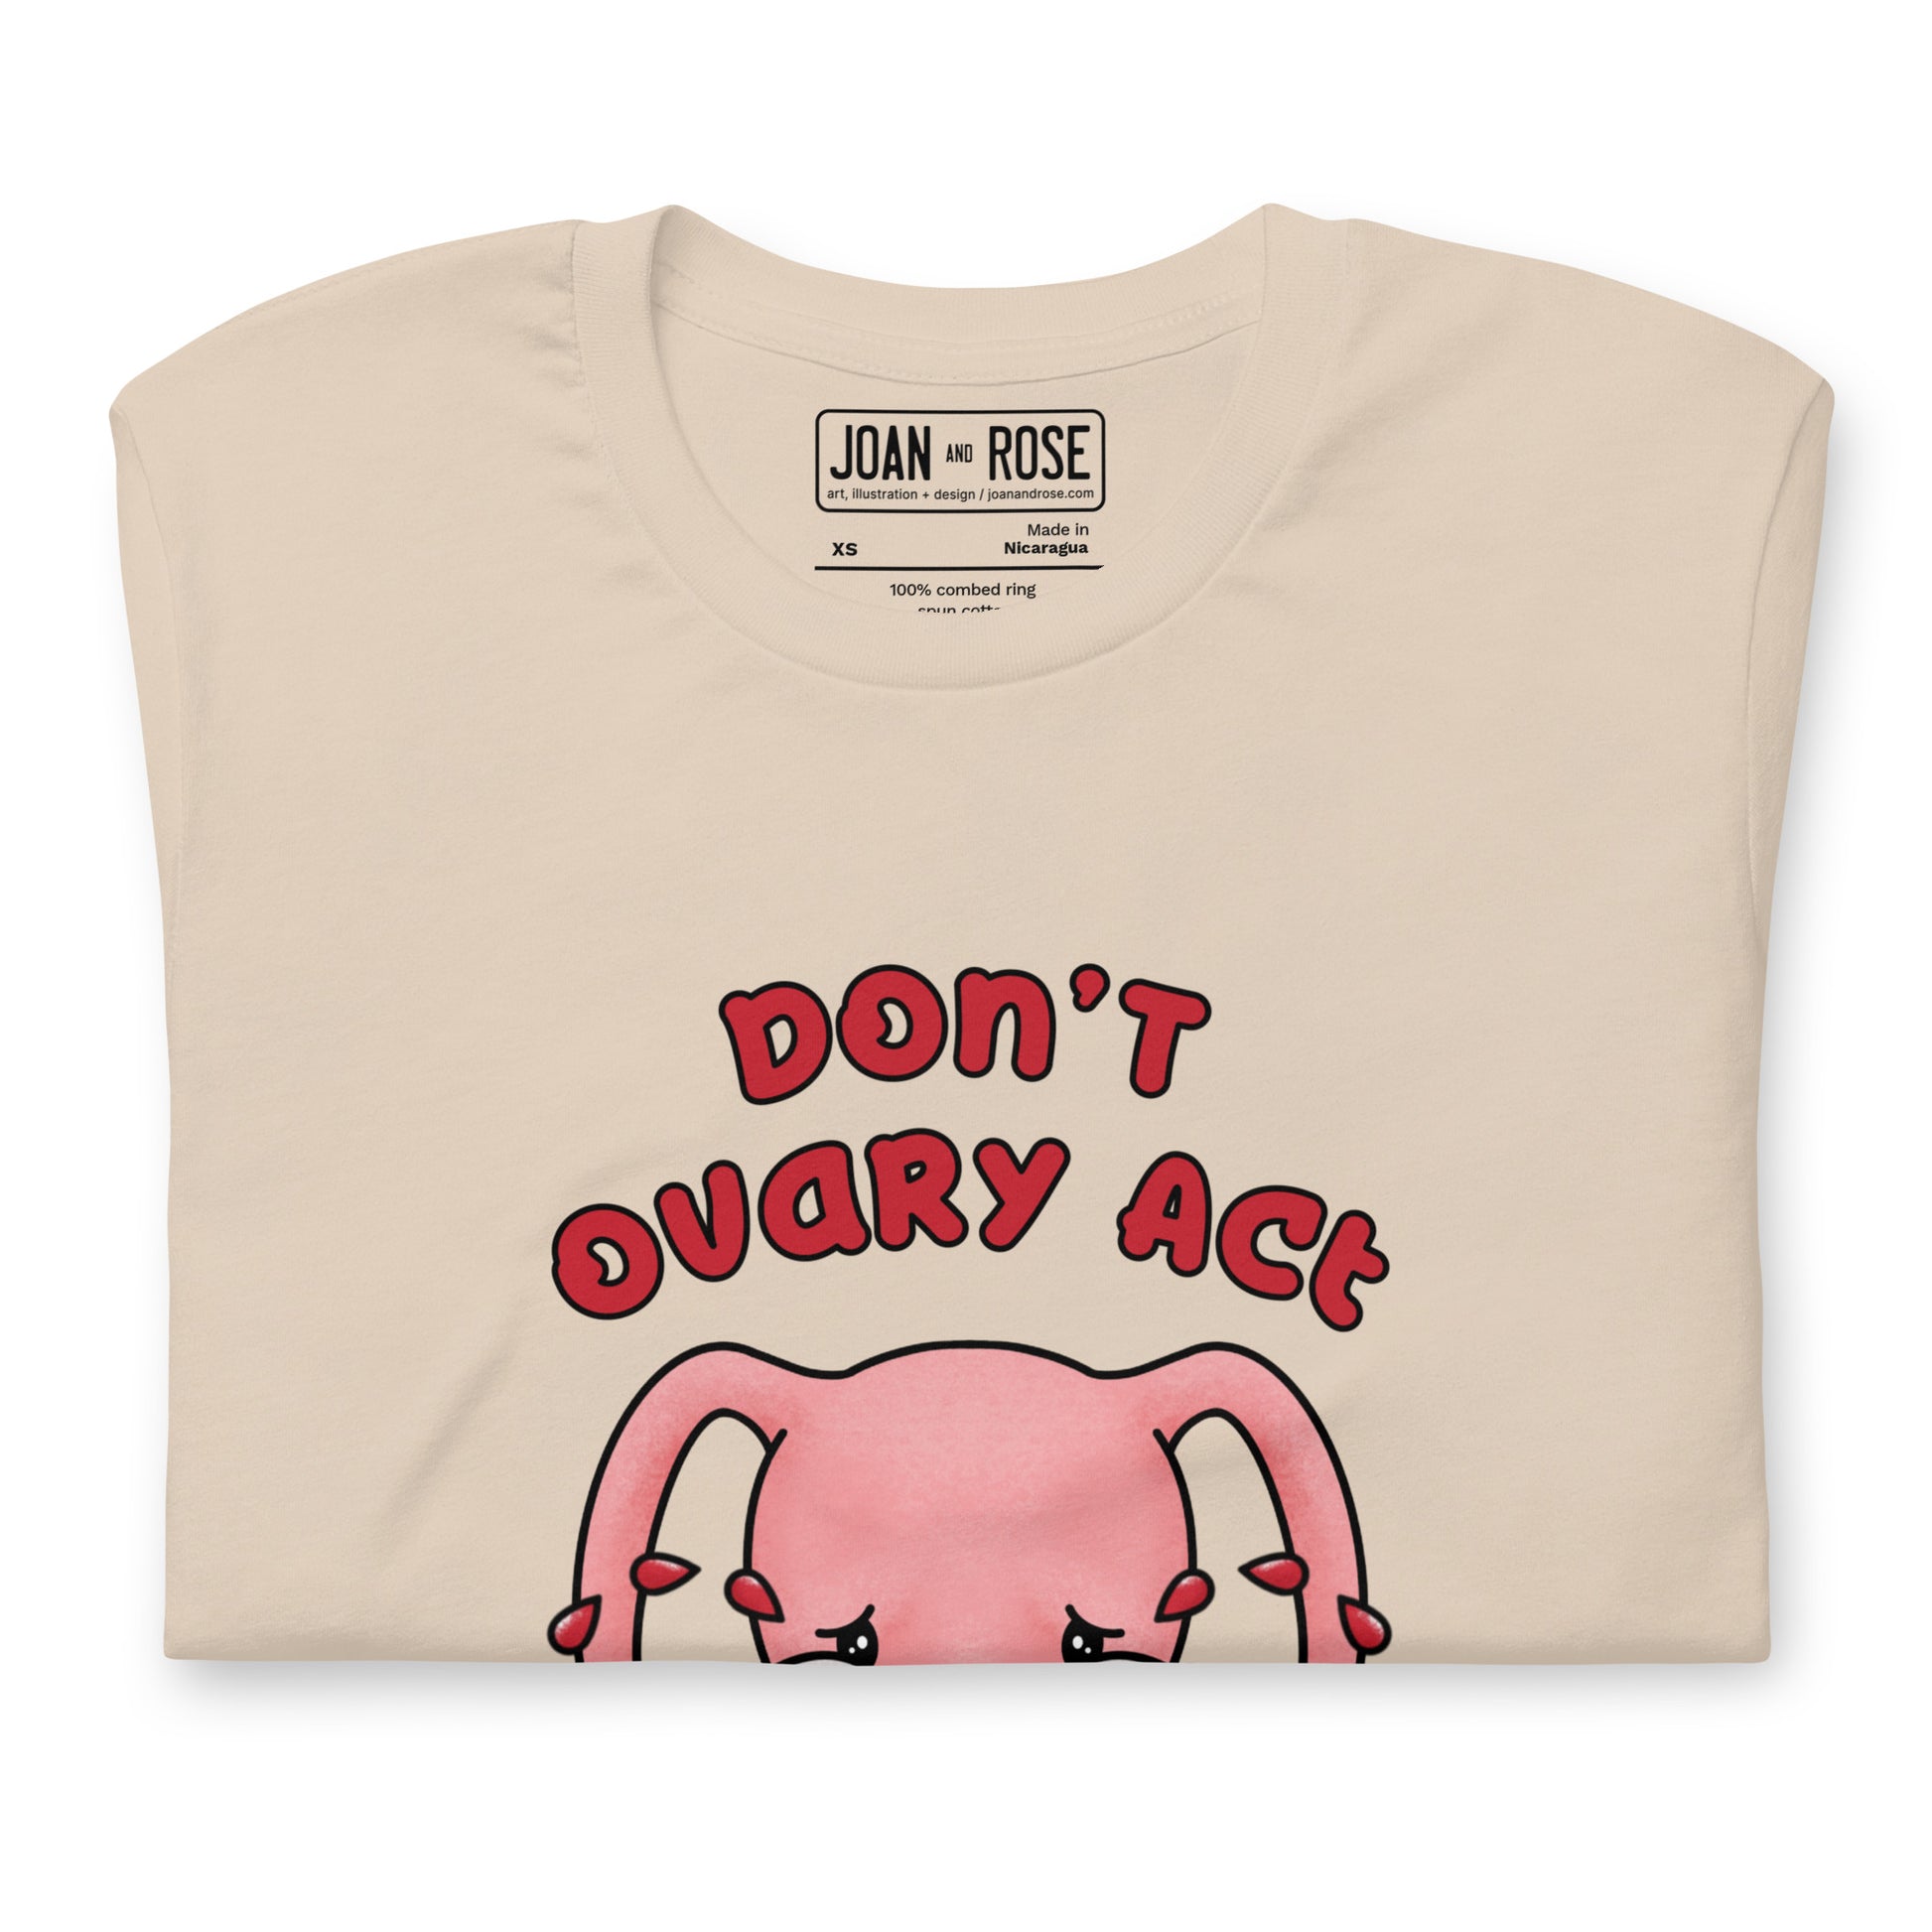 Close up of Don't Ovary Act t-shirt in cream showing inside label details